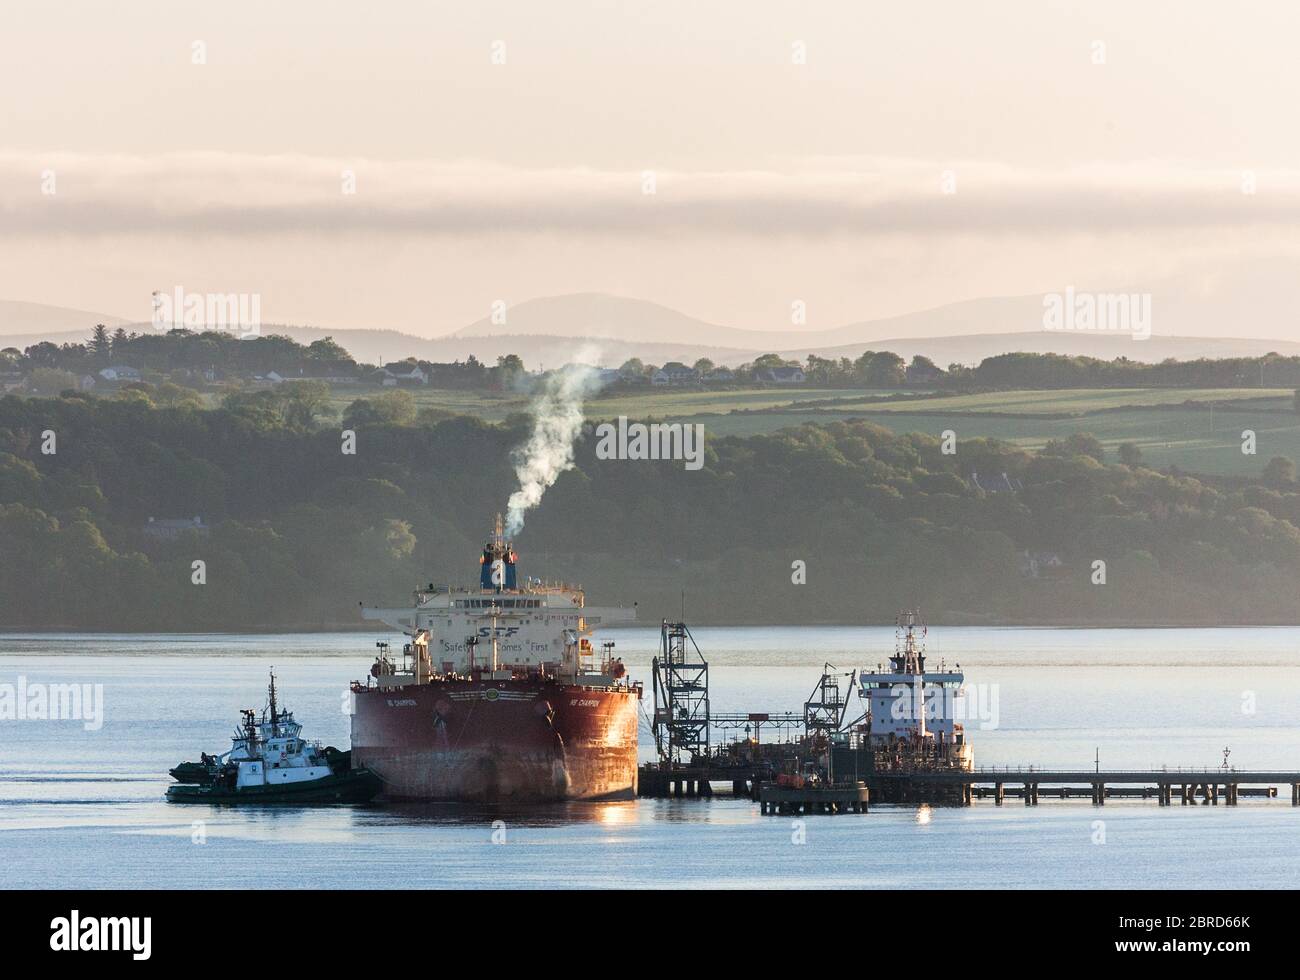 Whitegate, Cork, Ireland. 21st May, 2020. Oil tanker NS Champion is assisted by tug boats DSG Titan and Alex as she prepares to cast off at dawn after discharging her cargo of crude at the Irving Oil Refinery at Whitegate, Co. Cork, Ireland. Since the outbreak of the Covid-19 pandemic demand for oil has slumped on international markets which has resulted in a shortage of storage capacity worlwide. - Credit; David Creedon / Alamy Live News Stock Photo